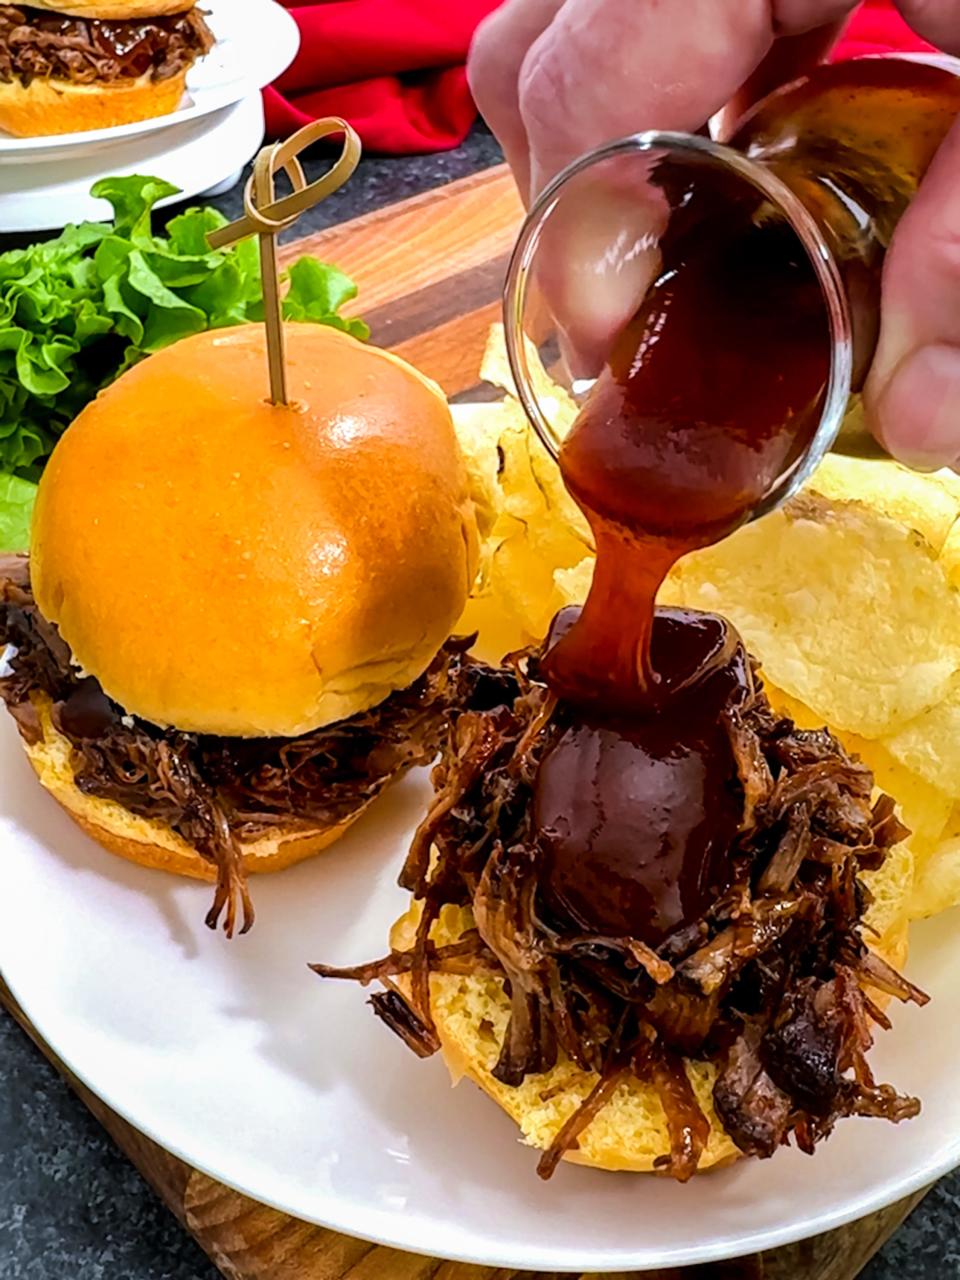 The shredded barbecue beef can be made ahead of time and piled high on the slider buns with some added barbecue sauce right before serving.